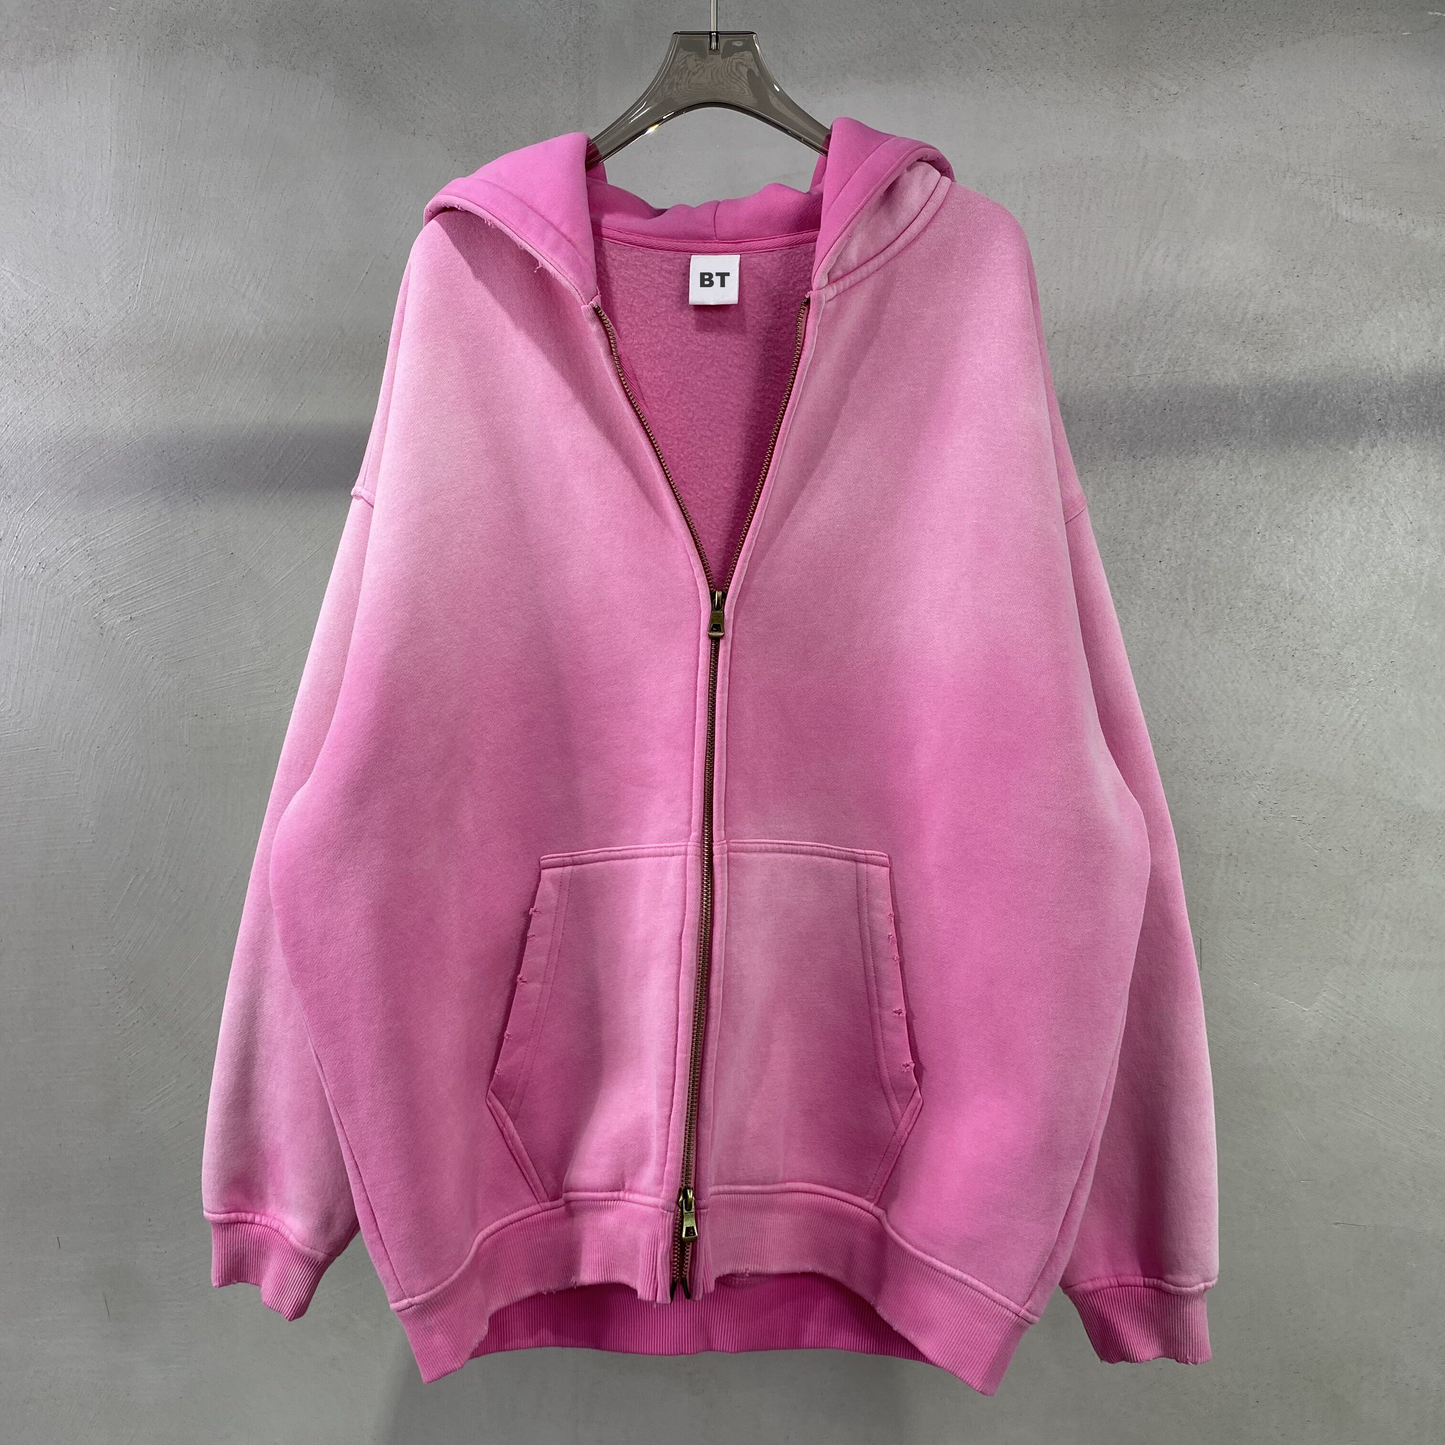 FADED DISTRESSED PINK ZIPPER